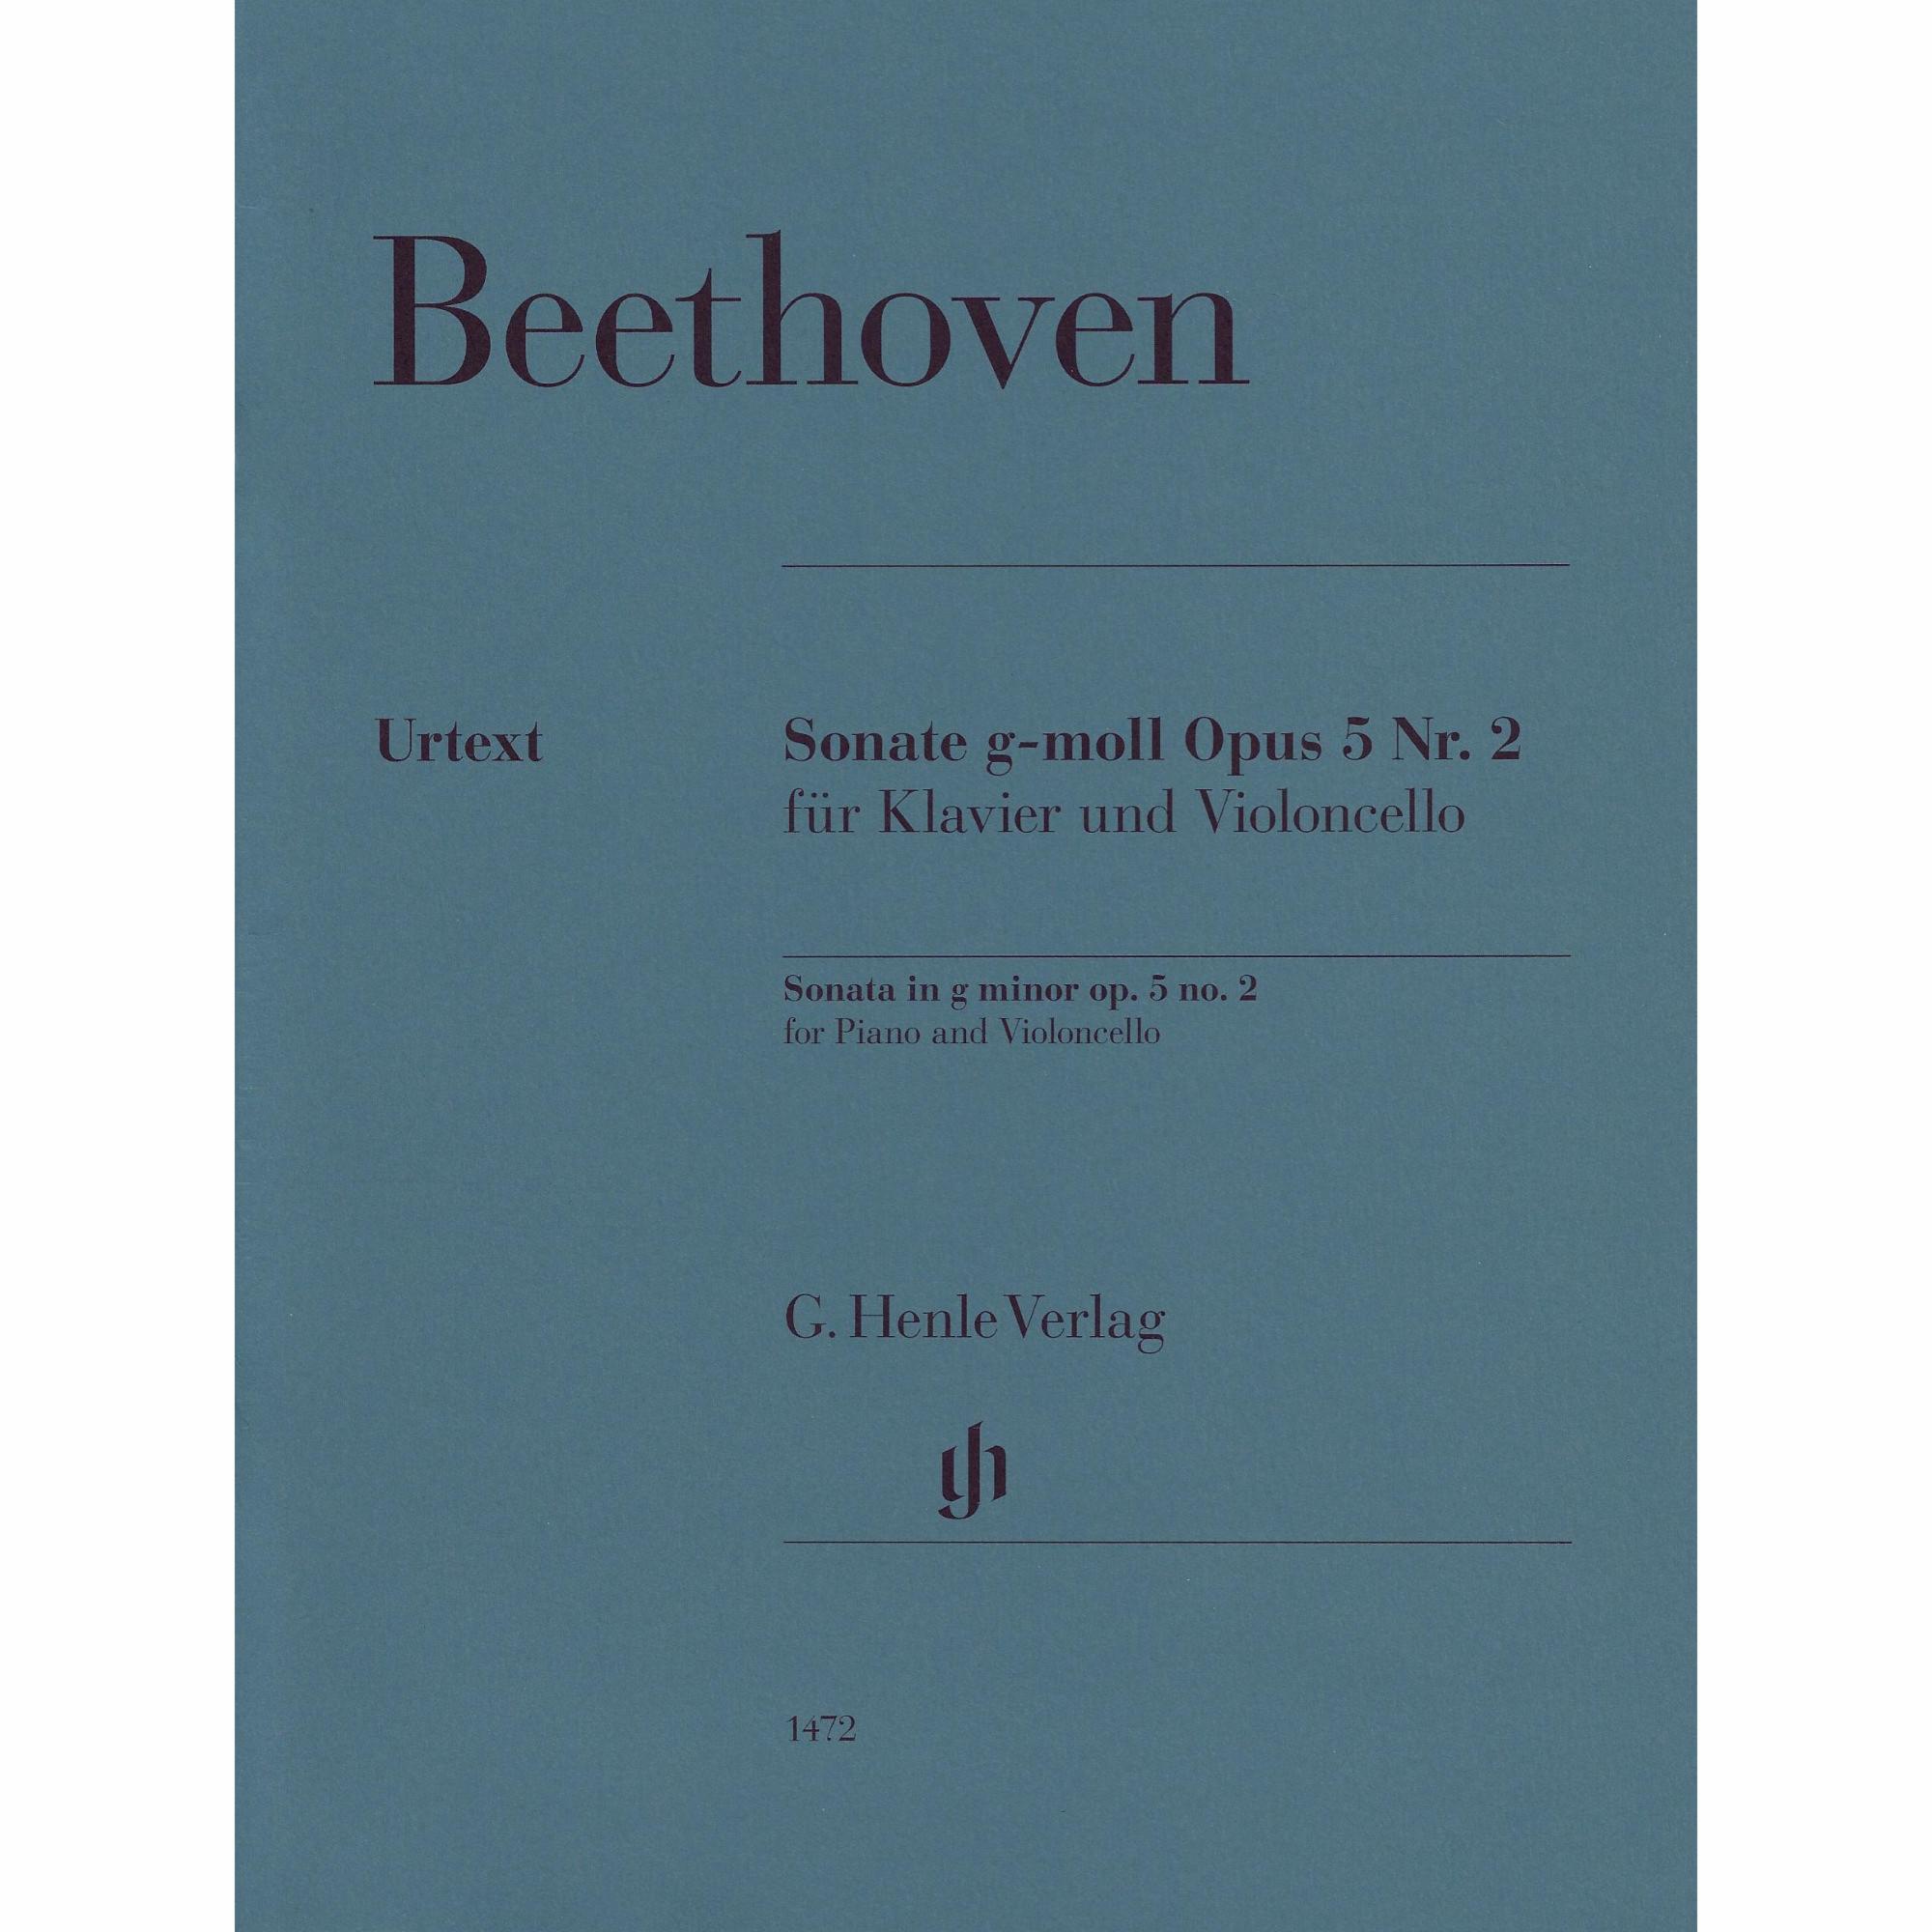 Beethoven -- Sonata in G Minor, Op. 5, No. 2 for Cello and Piano